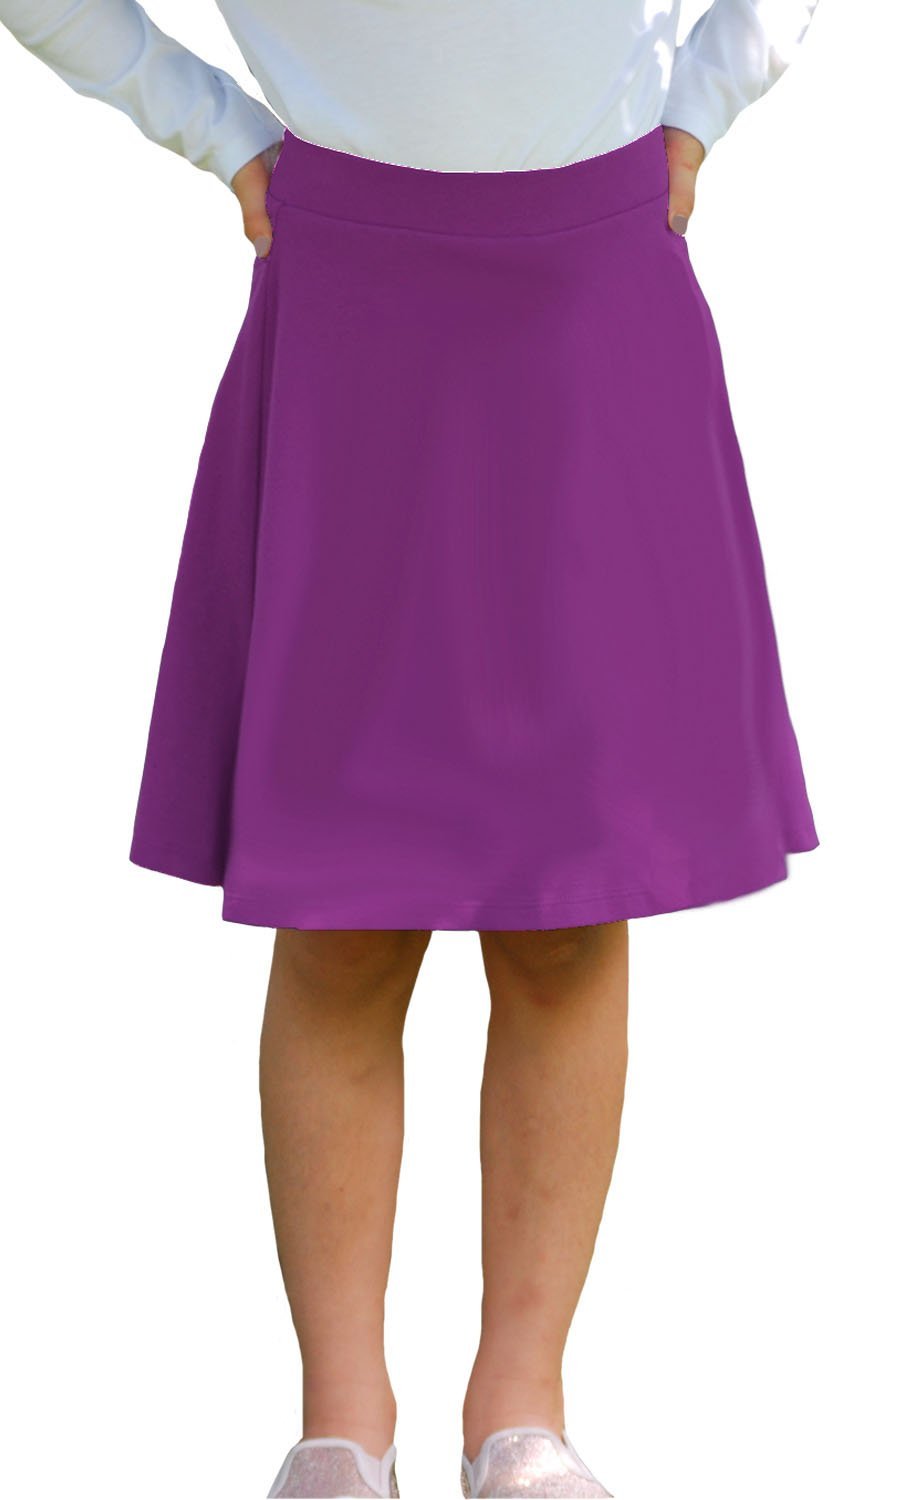 Girls Modest Skort with shorts underneath  Red And Purple